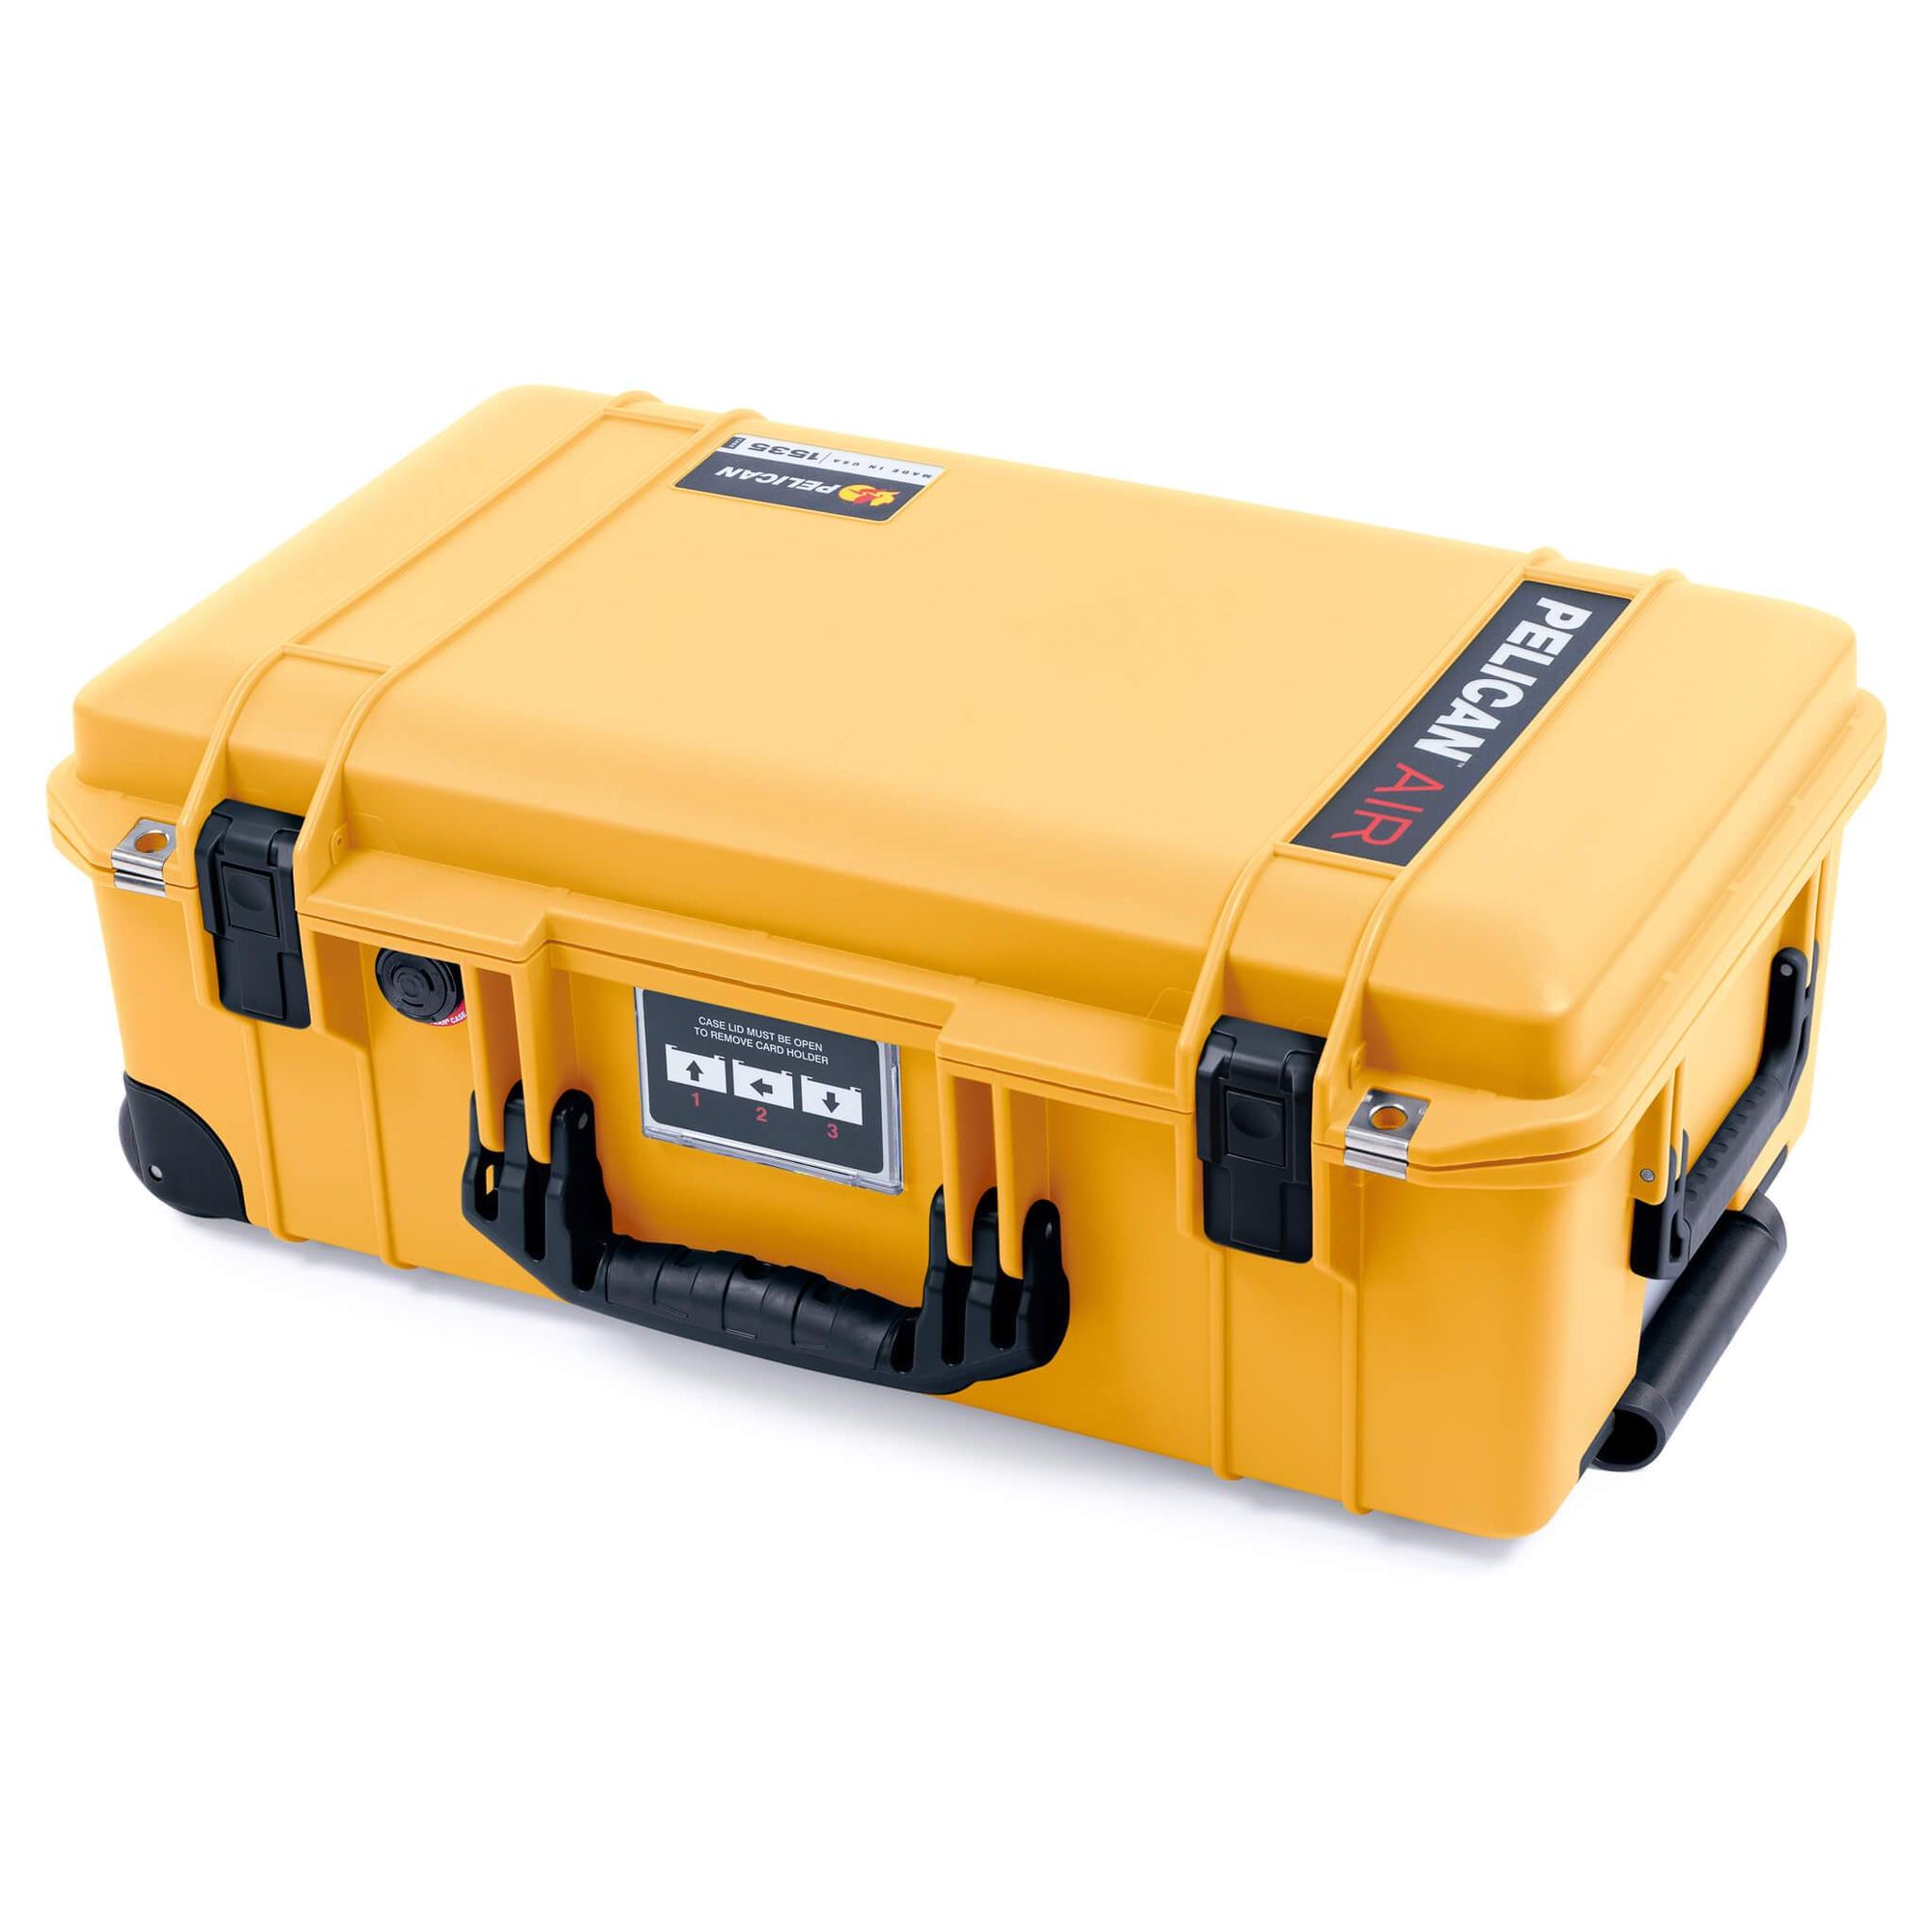 Pelican 1535 Air Case, Yellow with Black Handles, Push-Button Latches & Trolley ColorCase 